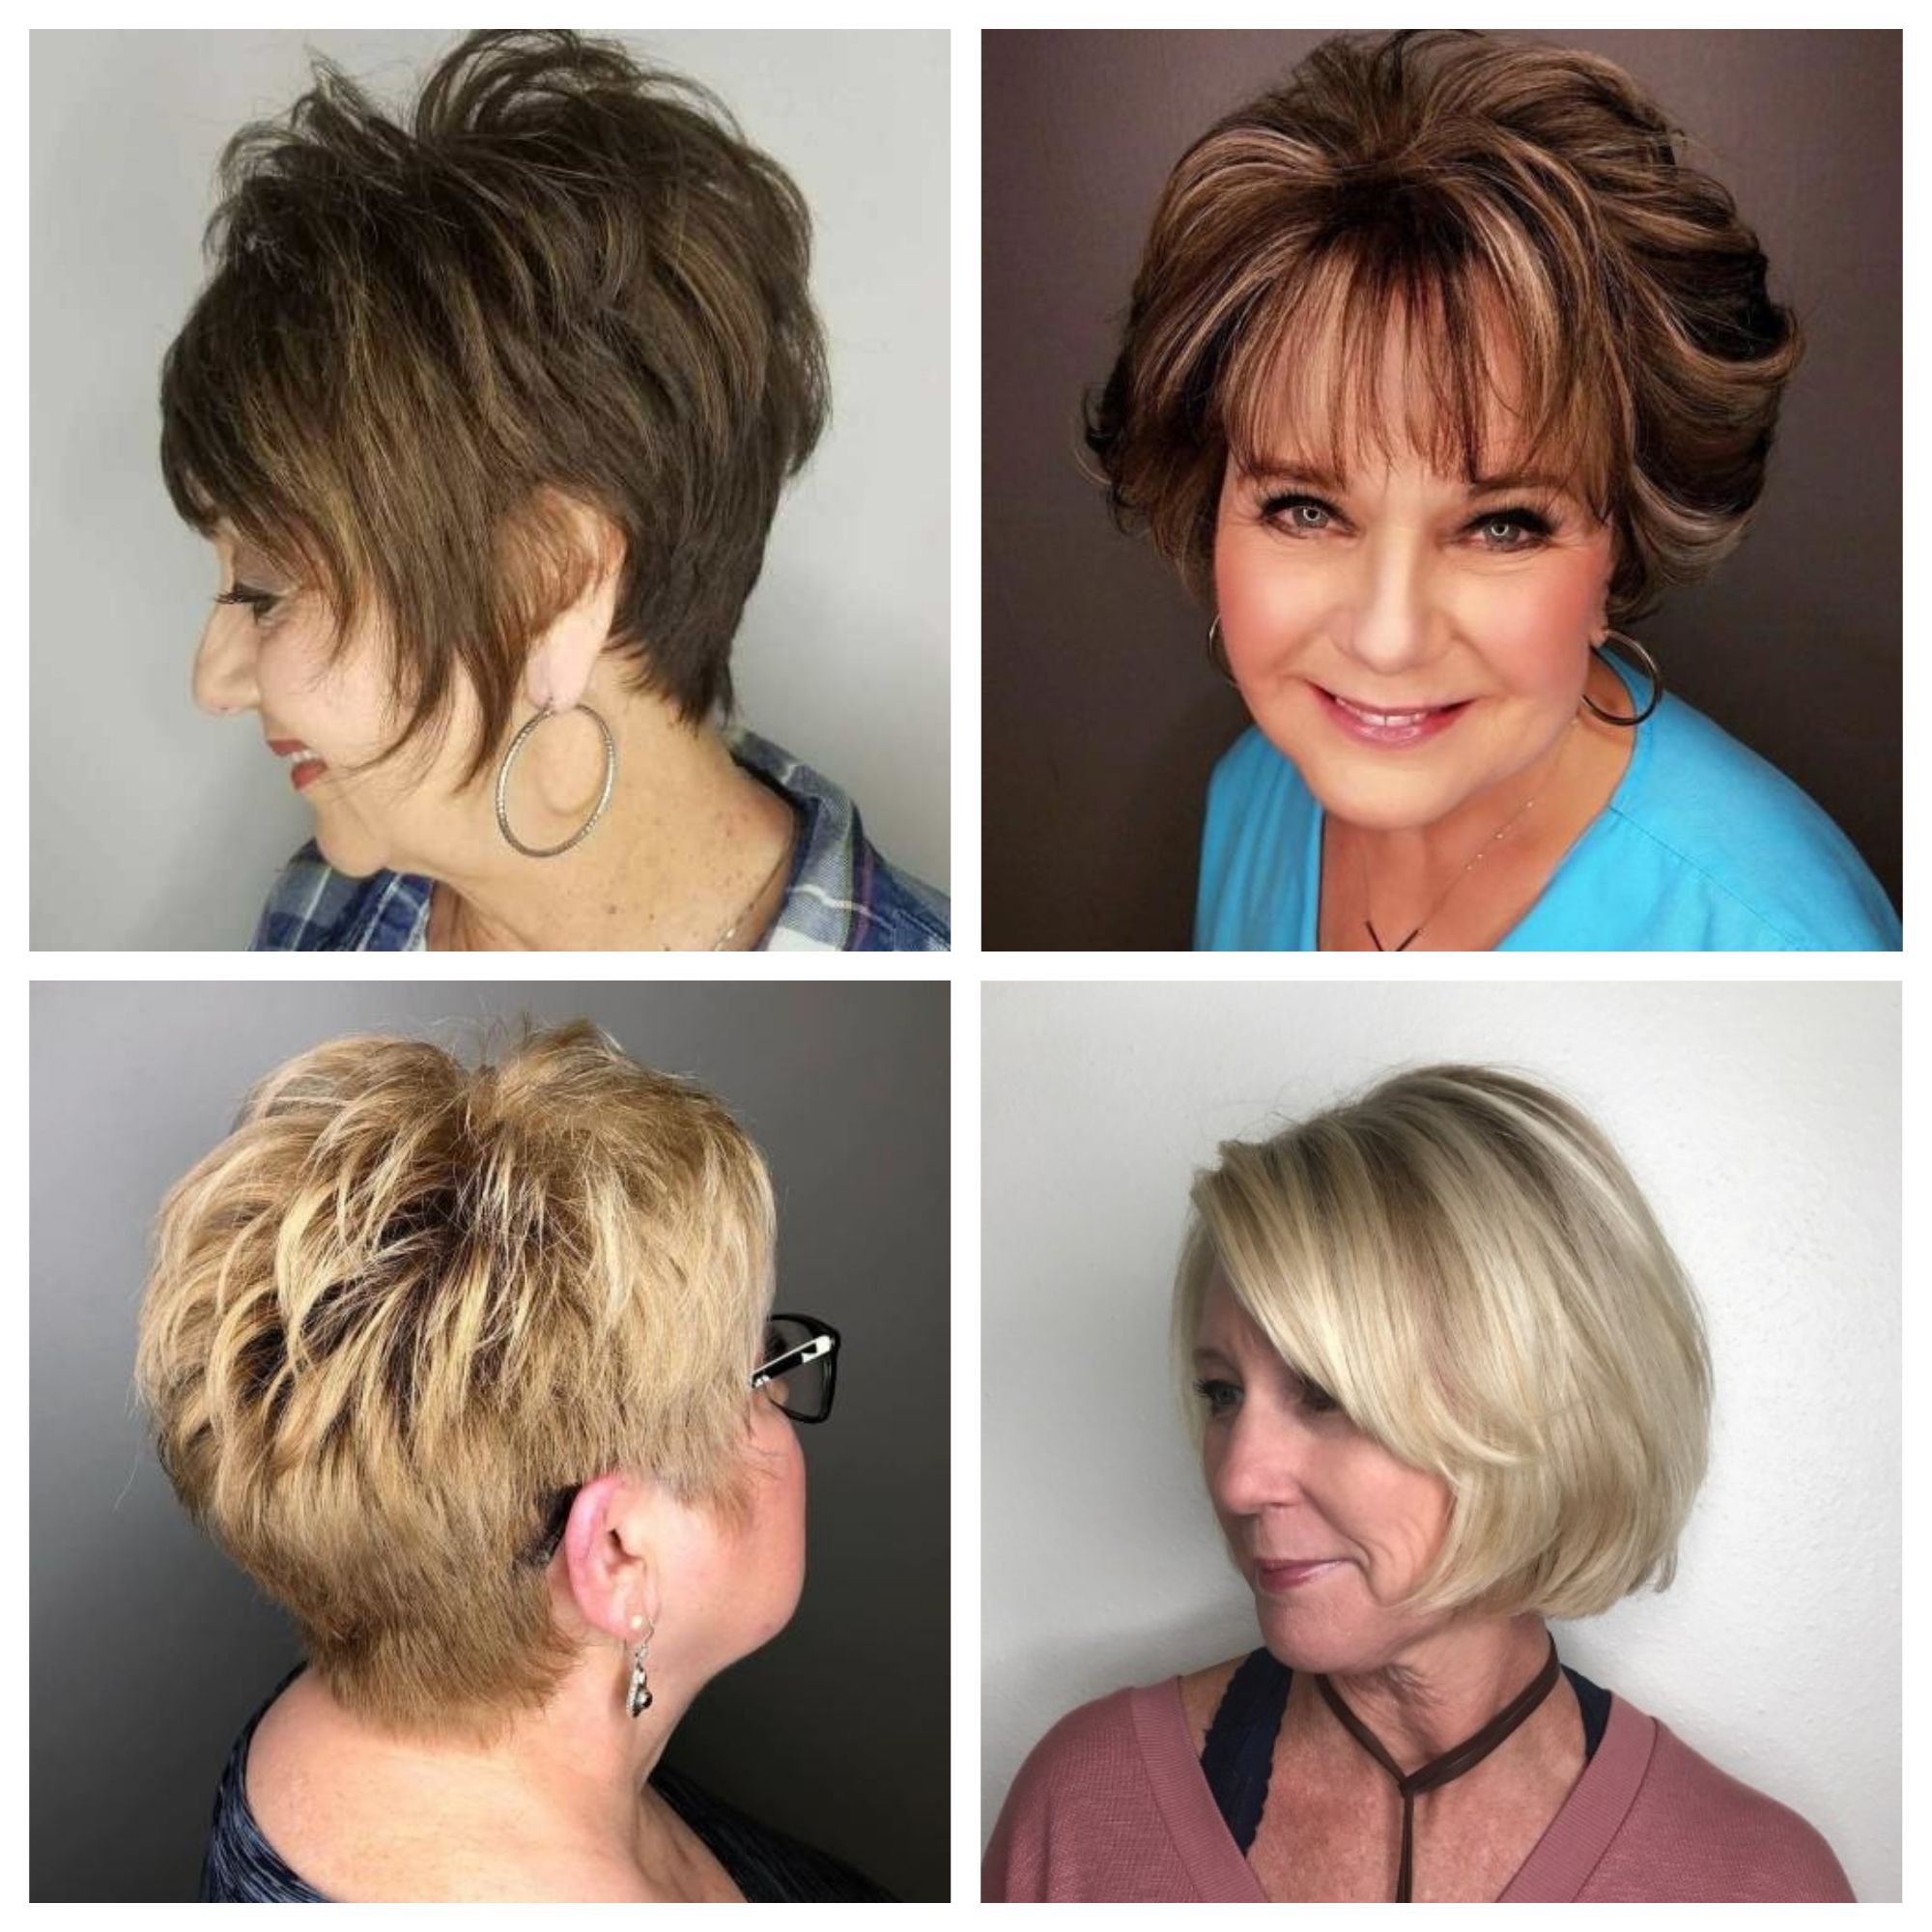 Short Hairstyles For Women Over 60 | 2019 Haircuts, Hairstyles And With Face Framing Short Hairstyles (Photo 16 of 25)